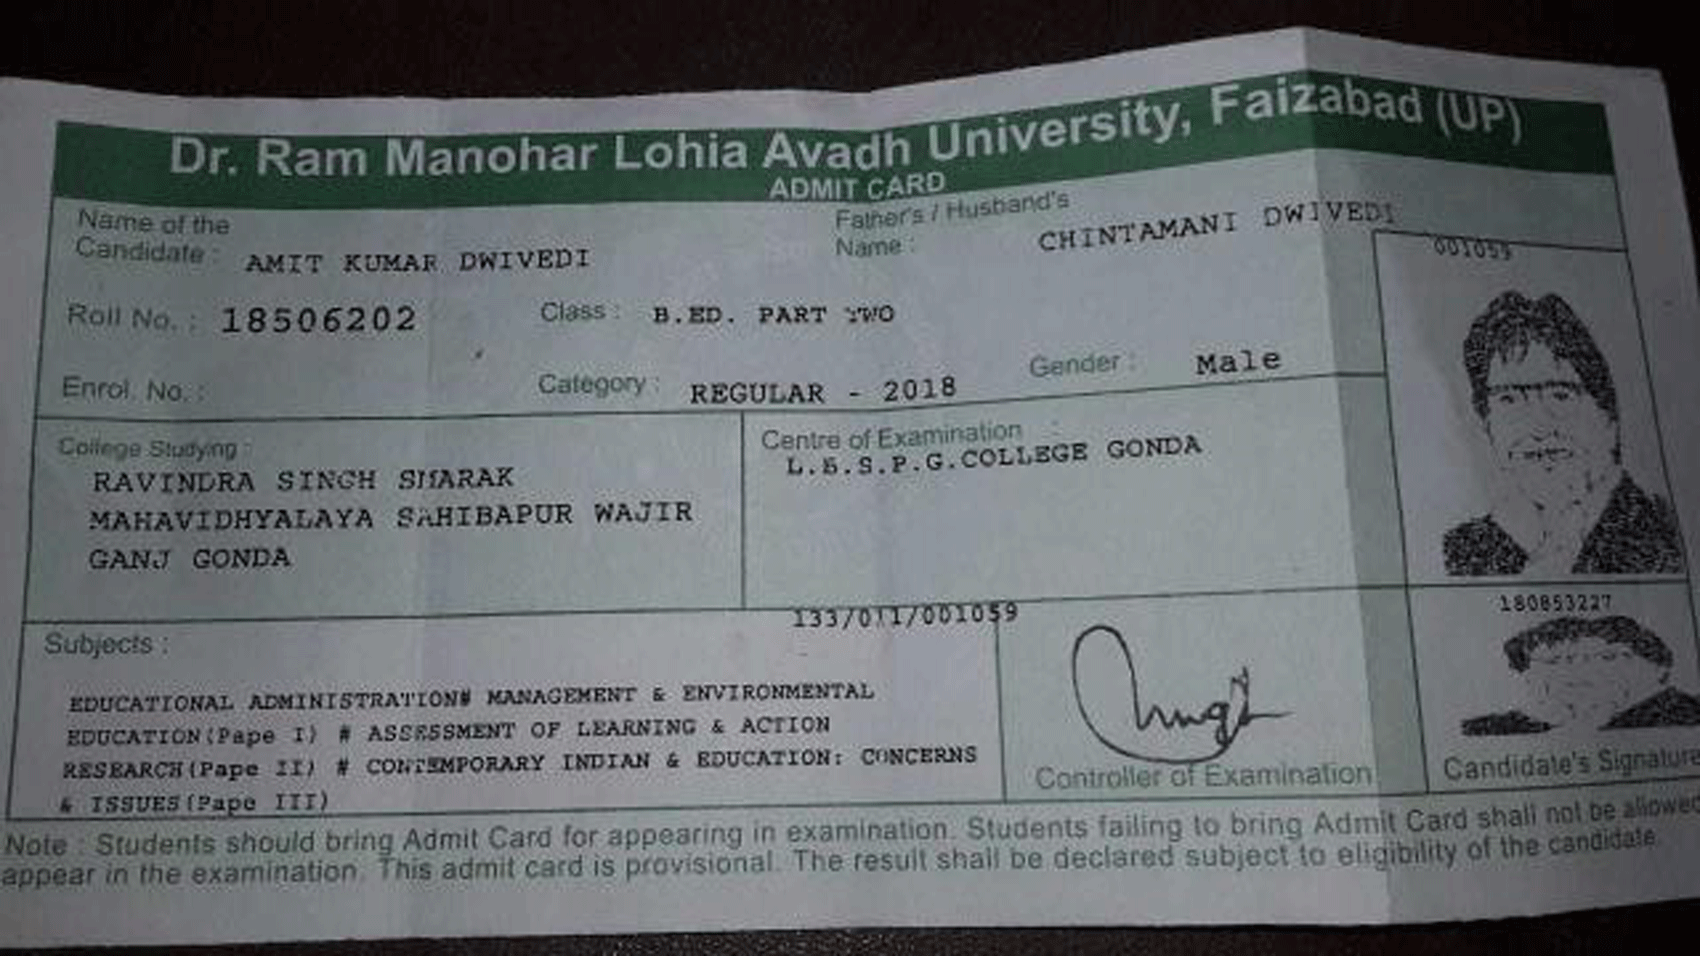 Avadh University issued a photograph of Amitabh Bachchan On admit card